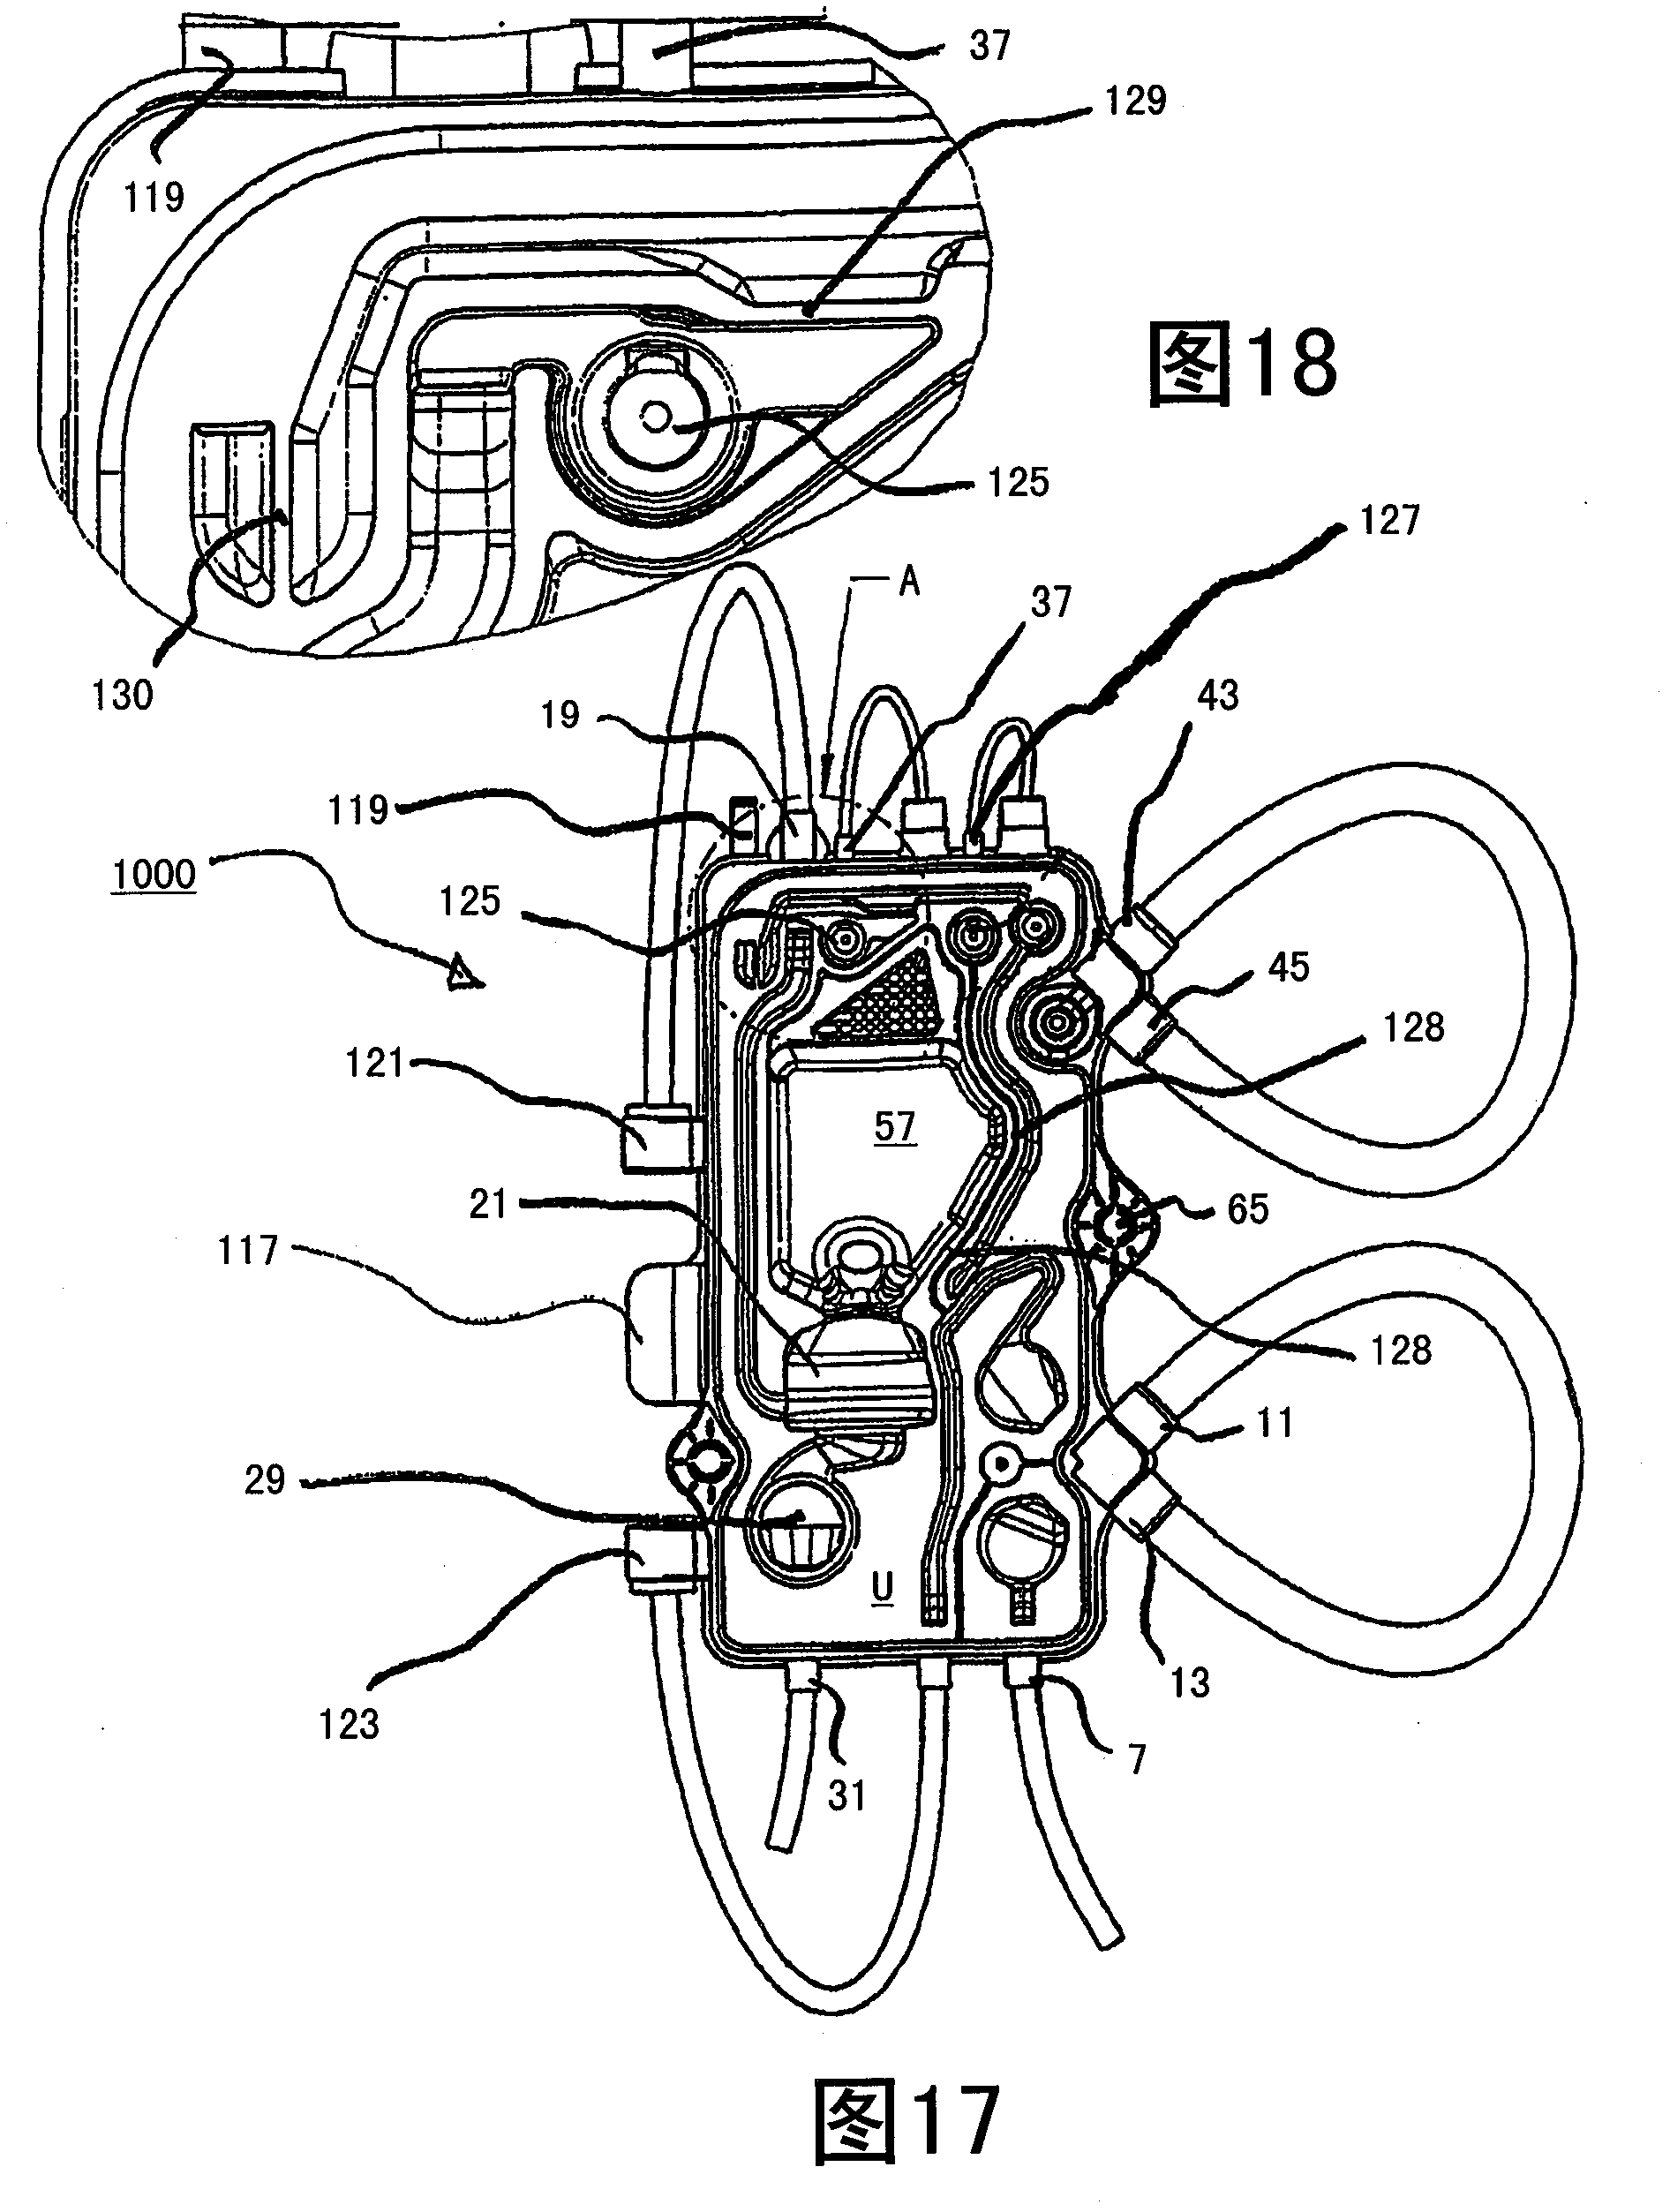 External functional device, blood treatment apparatus for accommodating such an external functional device, and methods